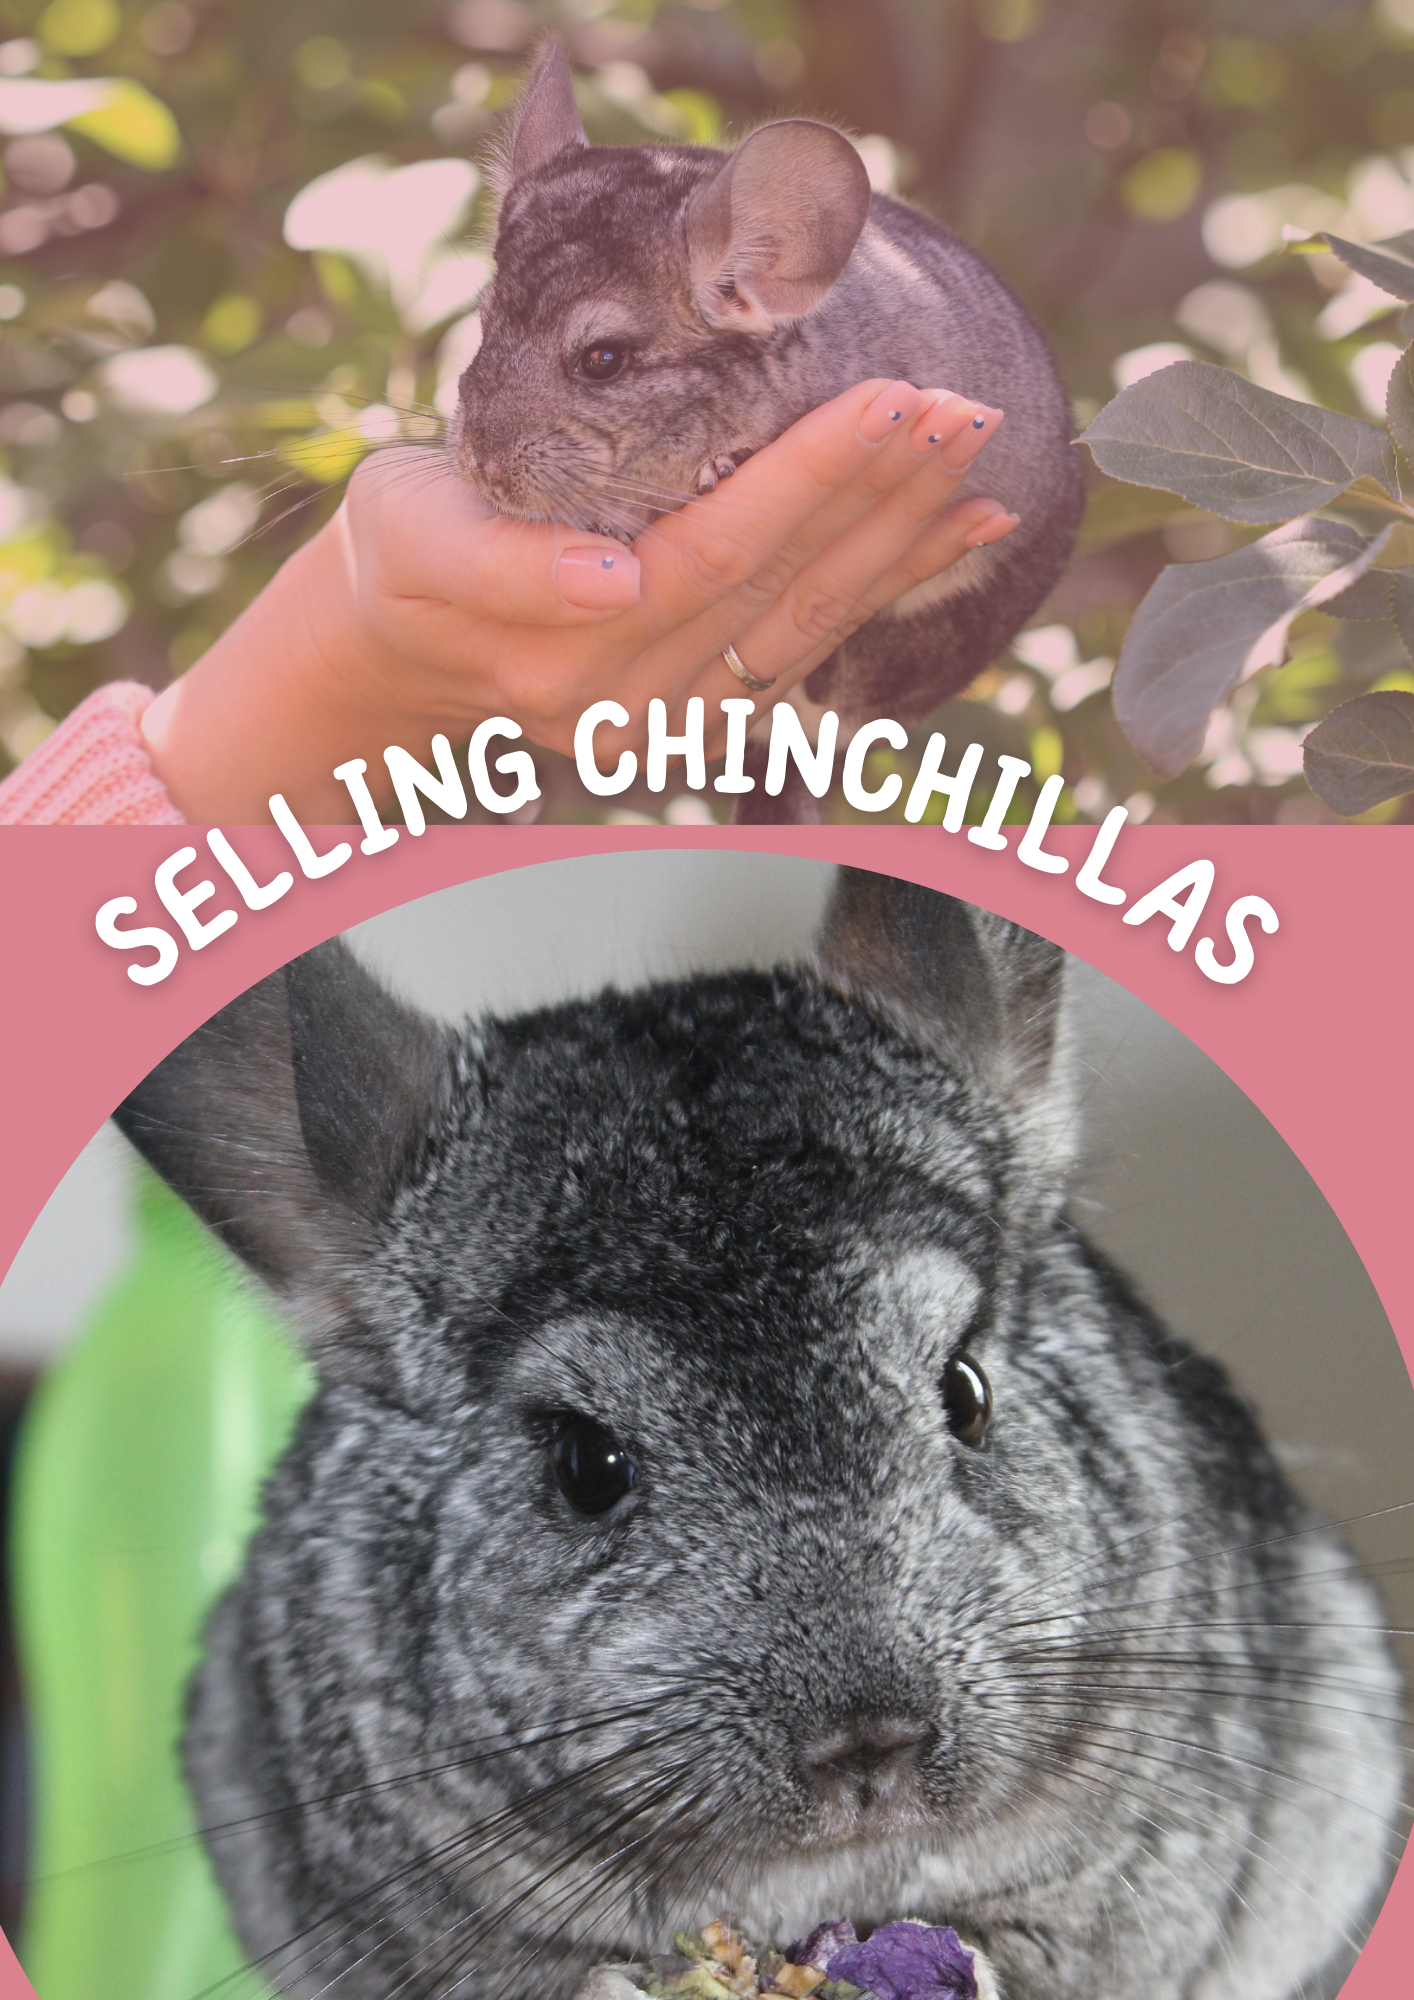 tips for Selling Chinchillas